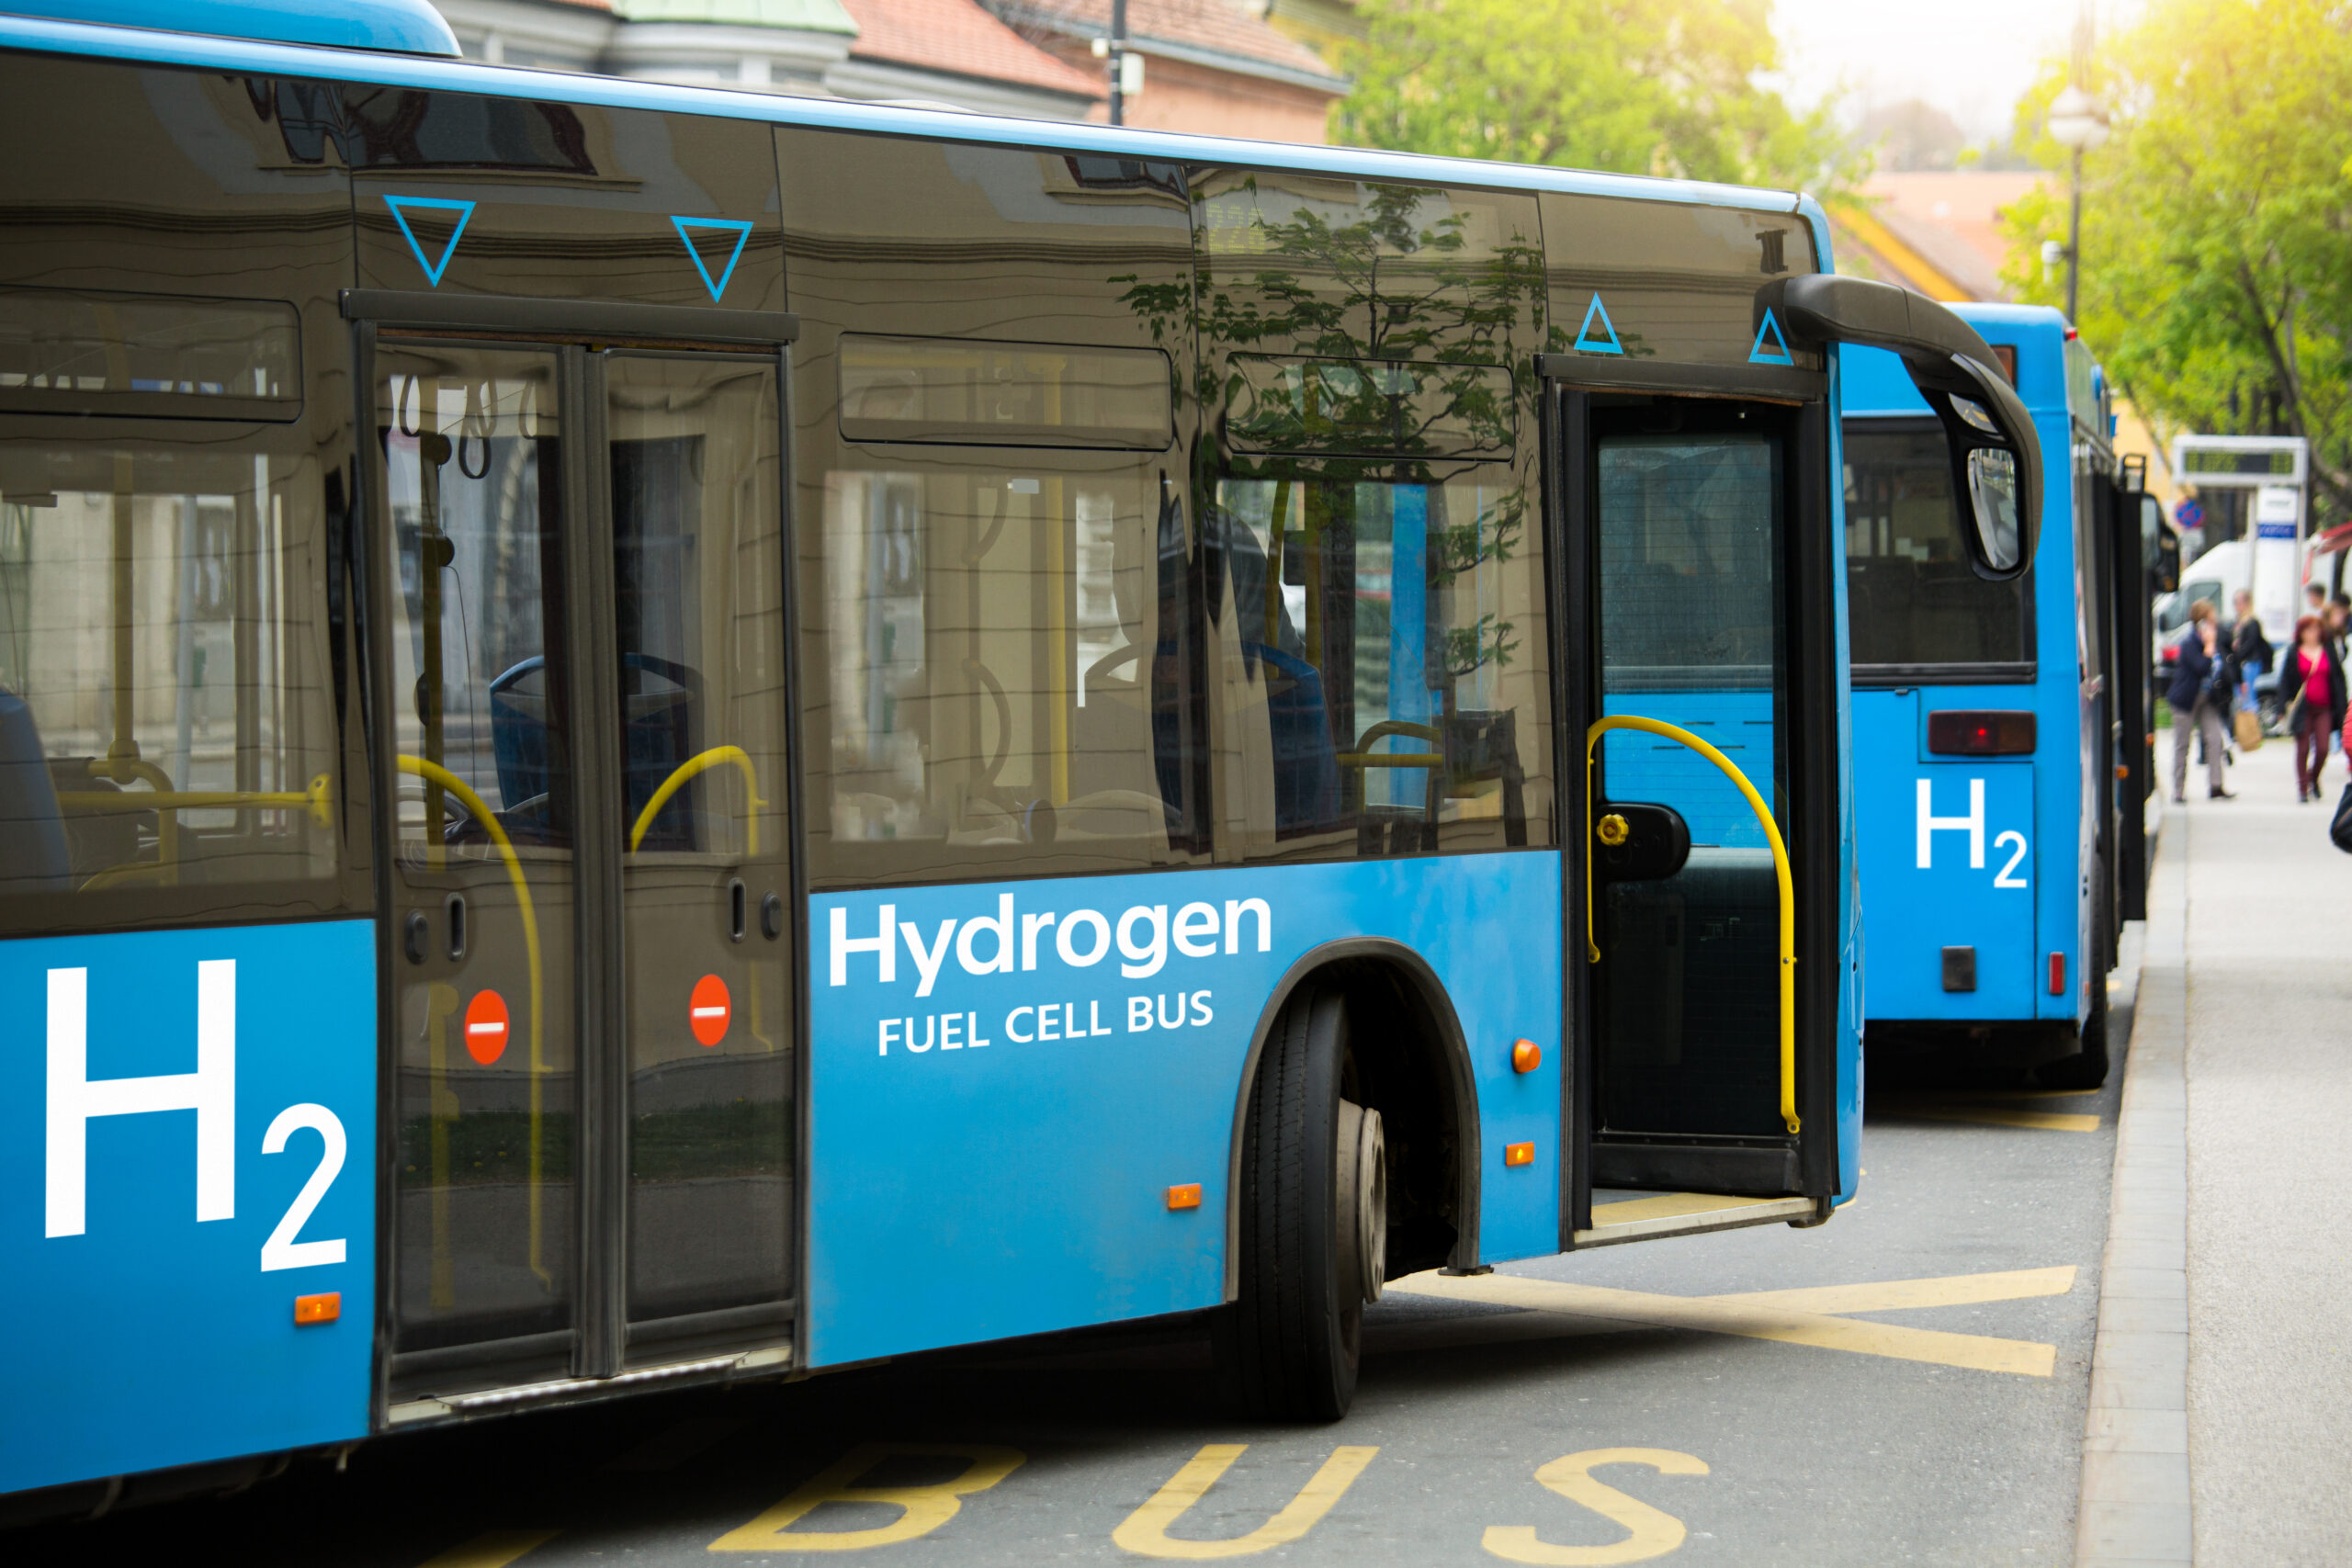 Hydrogen fuel cell buses at bus station.